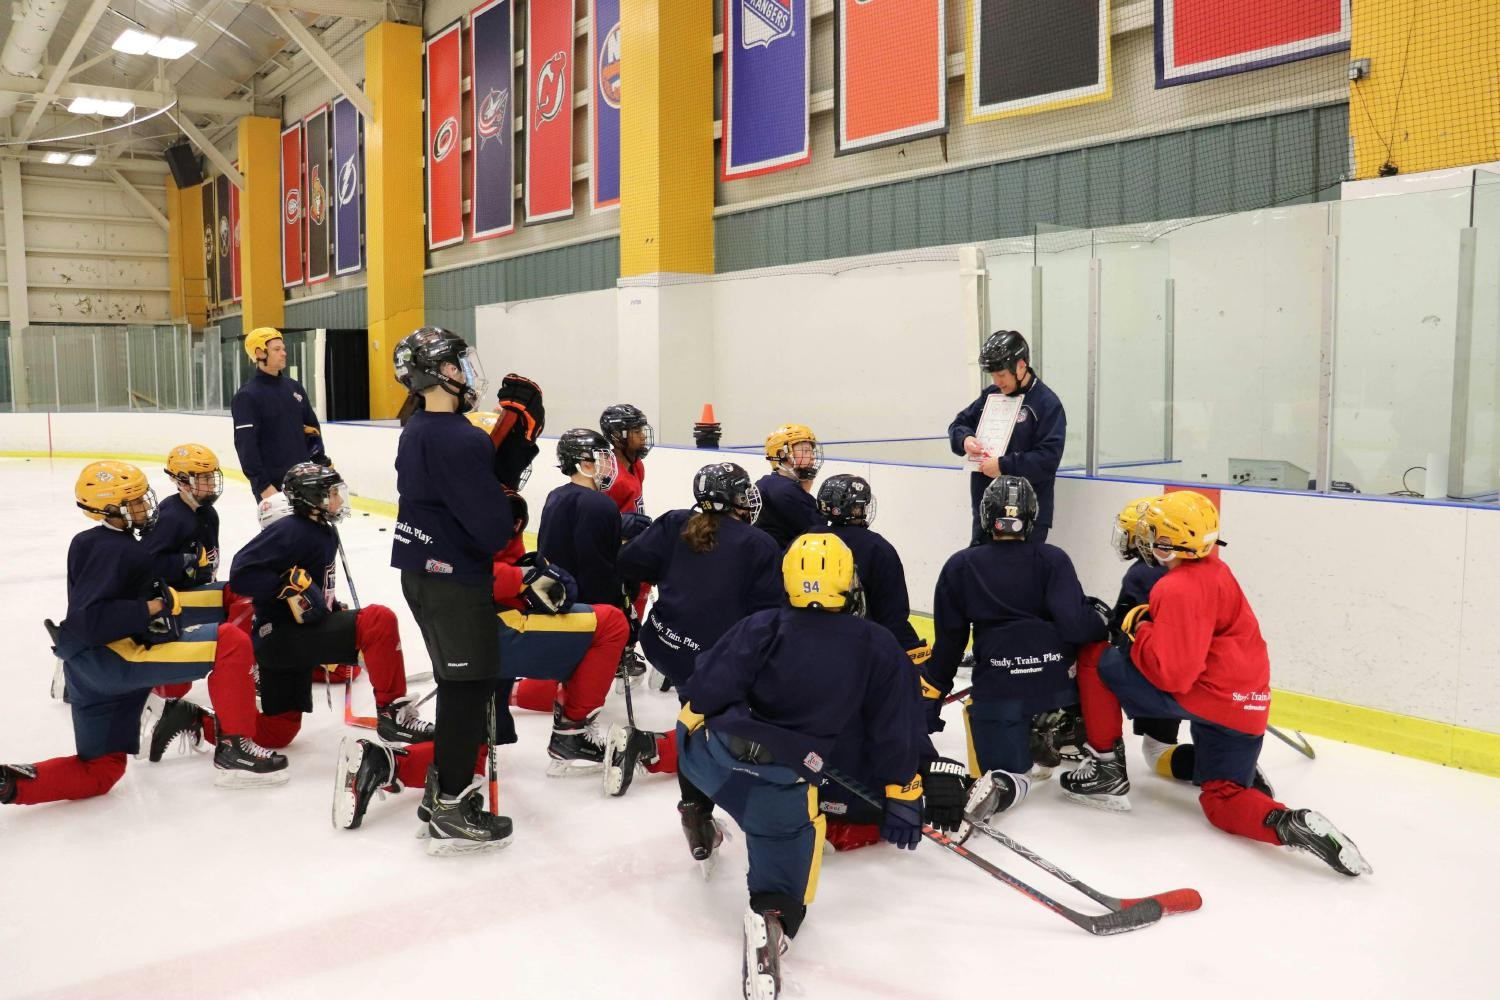 On ice hockey training session at the Center of Excellence